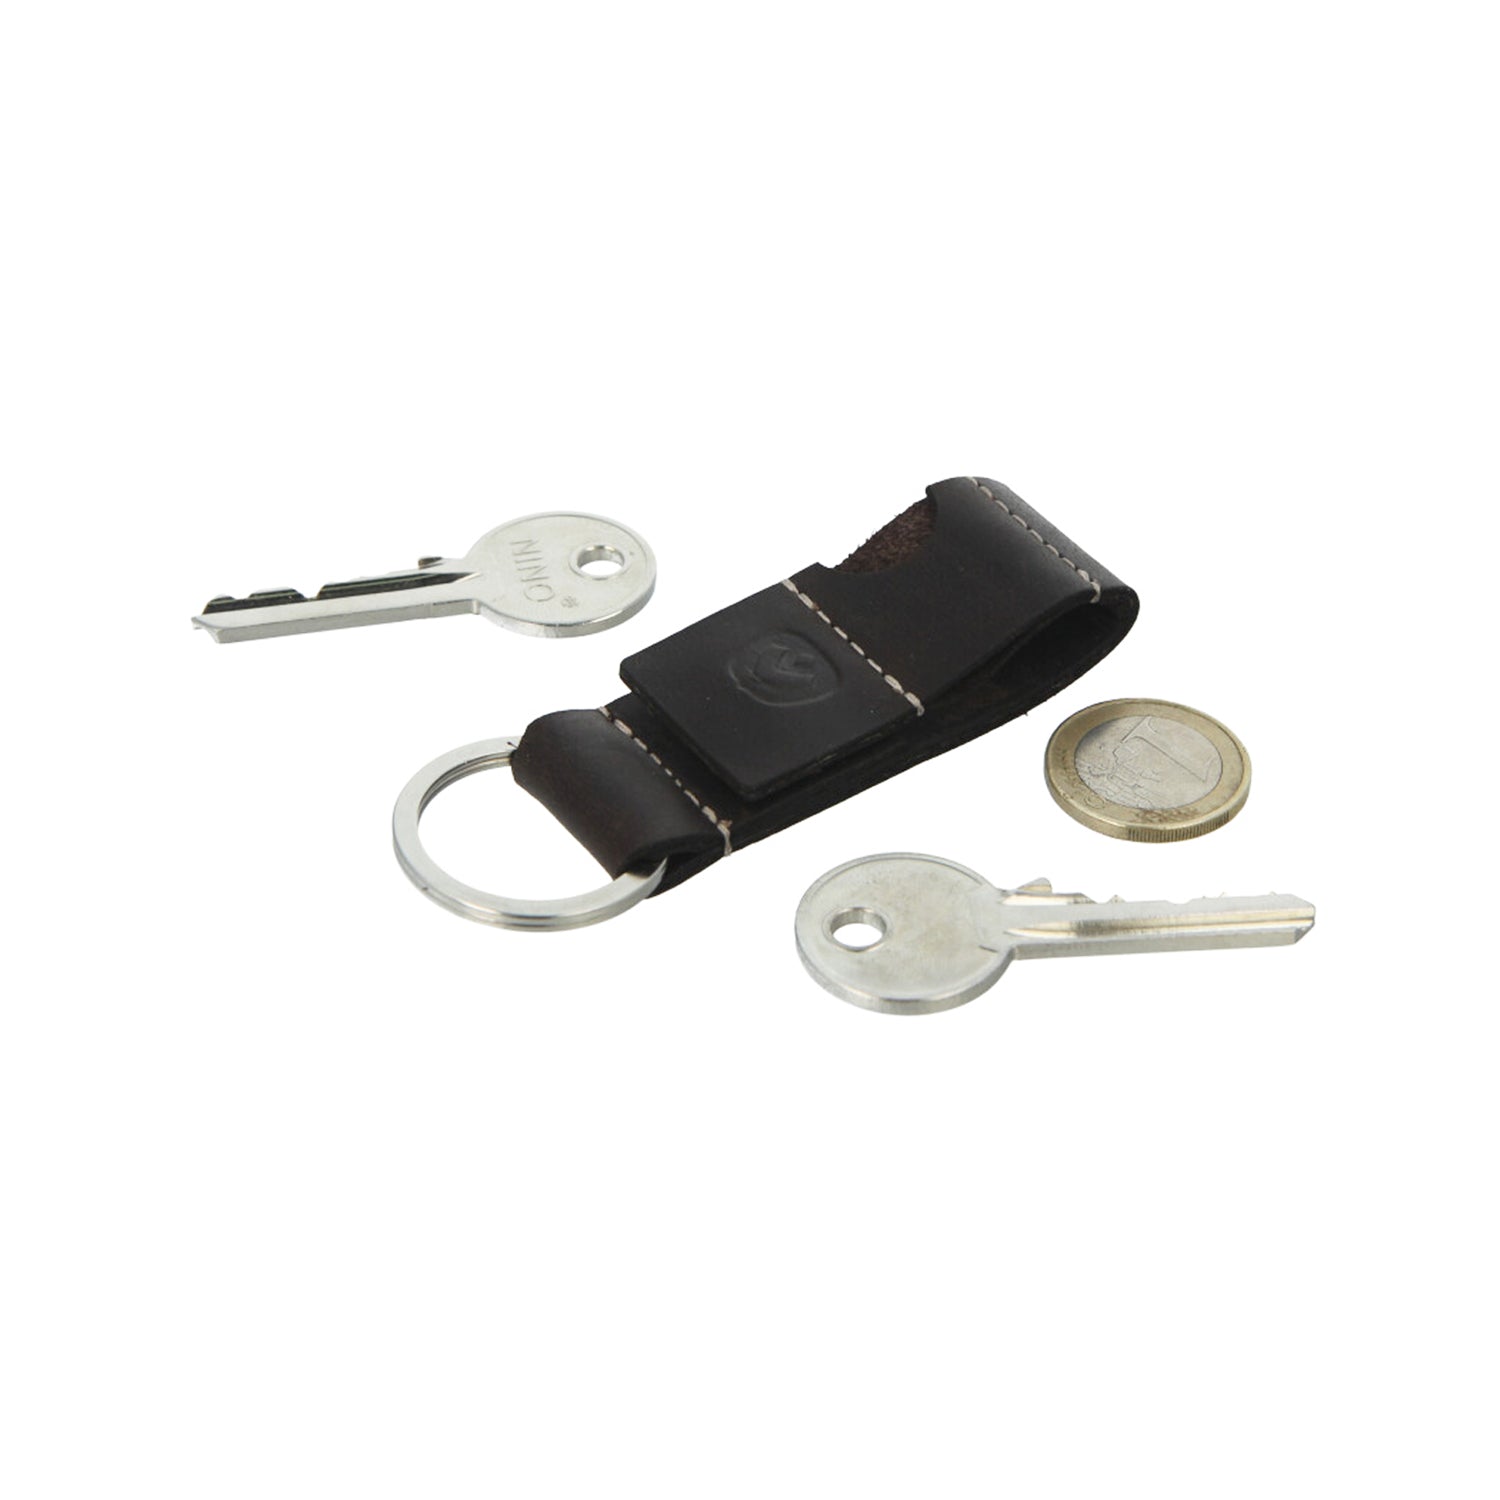 Keychain Leather Coin Black